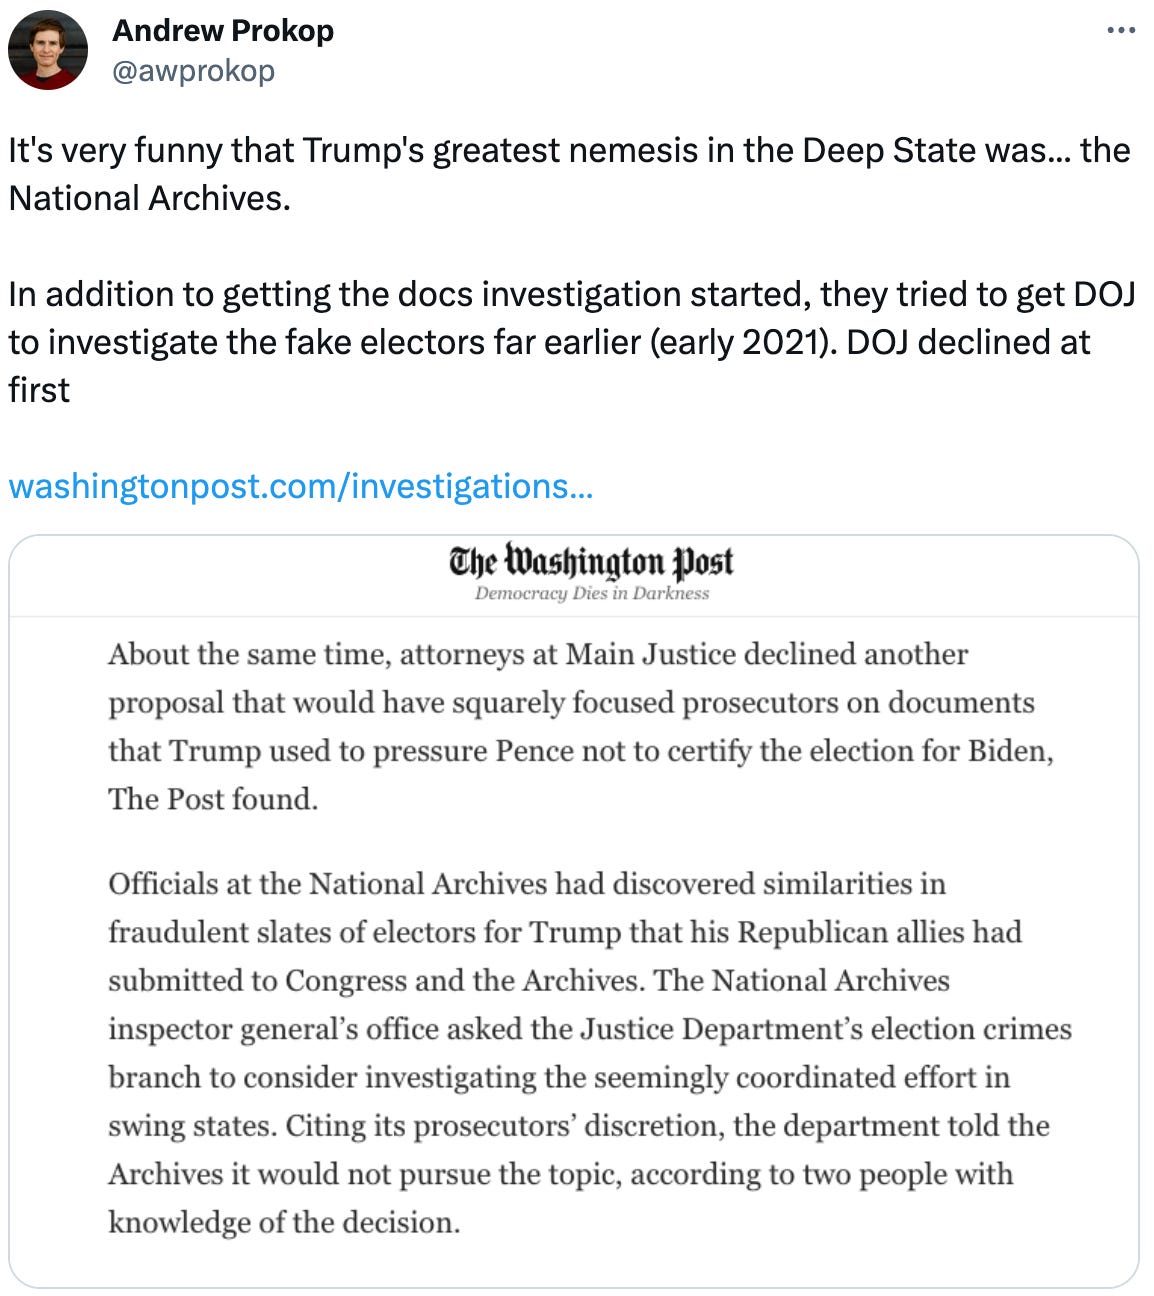  See new Tweets Conversation Andrew Prokop @awprokop It's very funny that Trump's greatest nemesis in the Deep State was... the National Archives.  In addition to getting the docs investigation started, they tried to get DOJ to investigate the fake electors far earlier (early 2021). DOJ declined at first   https://washingtonpost.com/investigations/2023/06/19/fbi-resisted-opening-probe-into-trumps-role-jan-6-more-than-year/